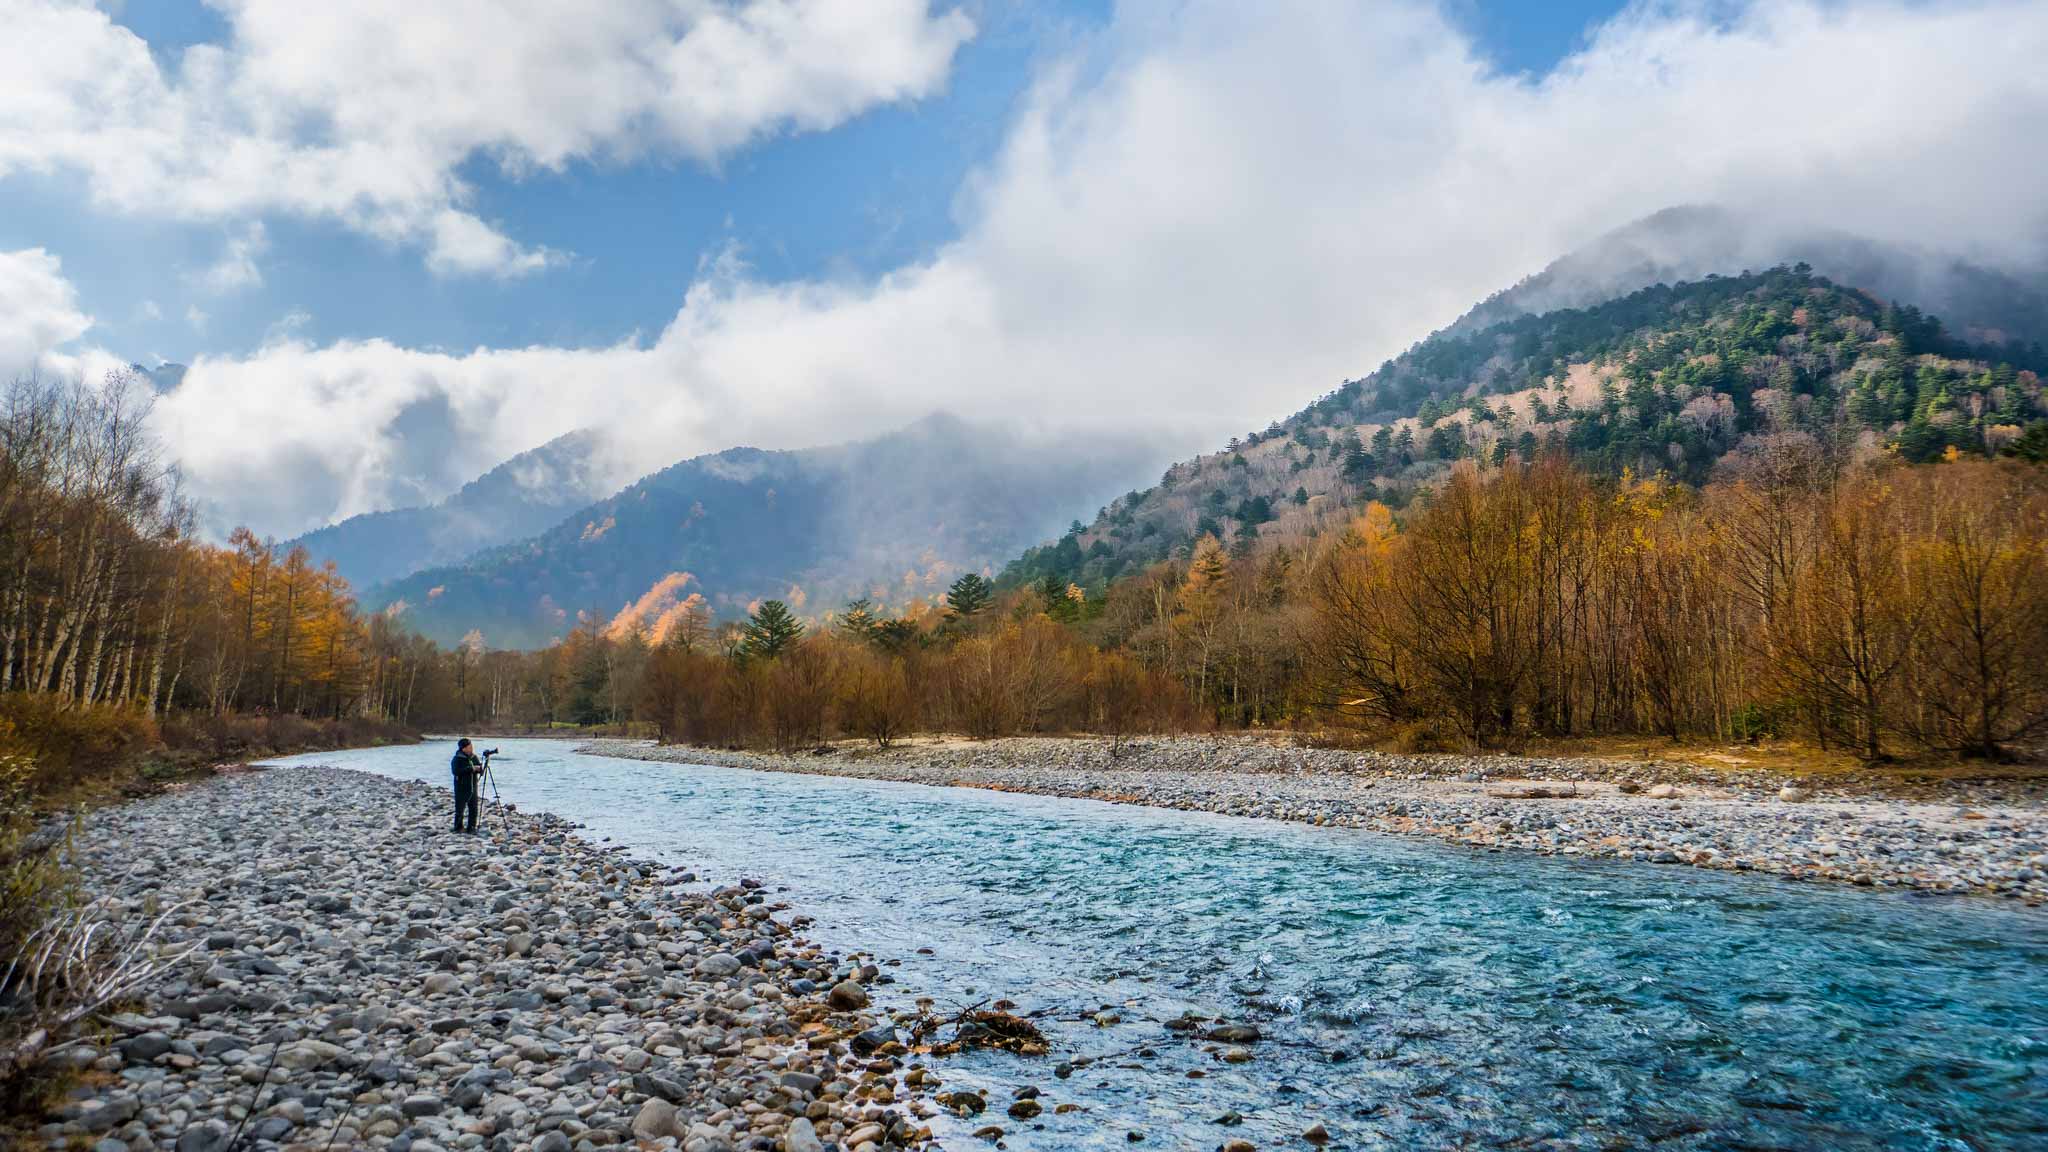 Kamikochi Japan - Visit This Amazing Valley In The Japanese Alps